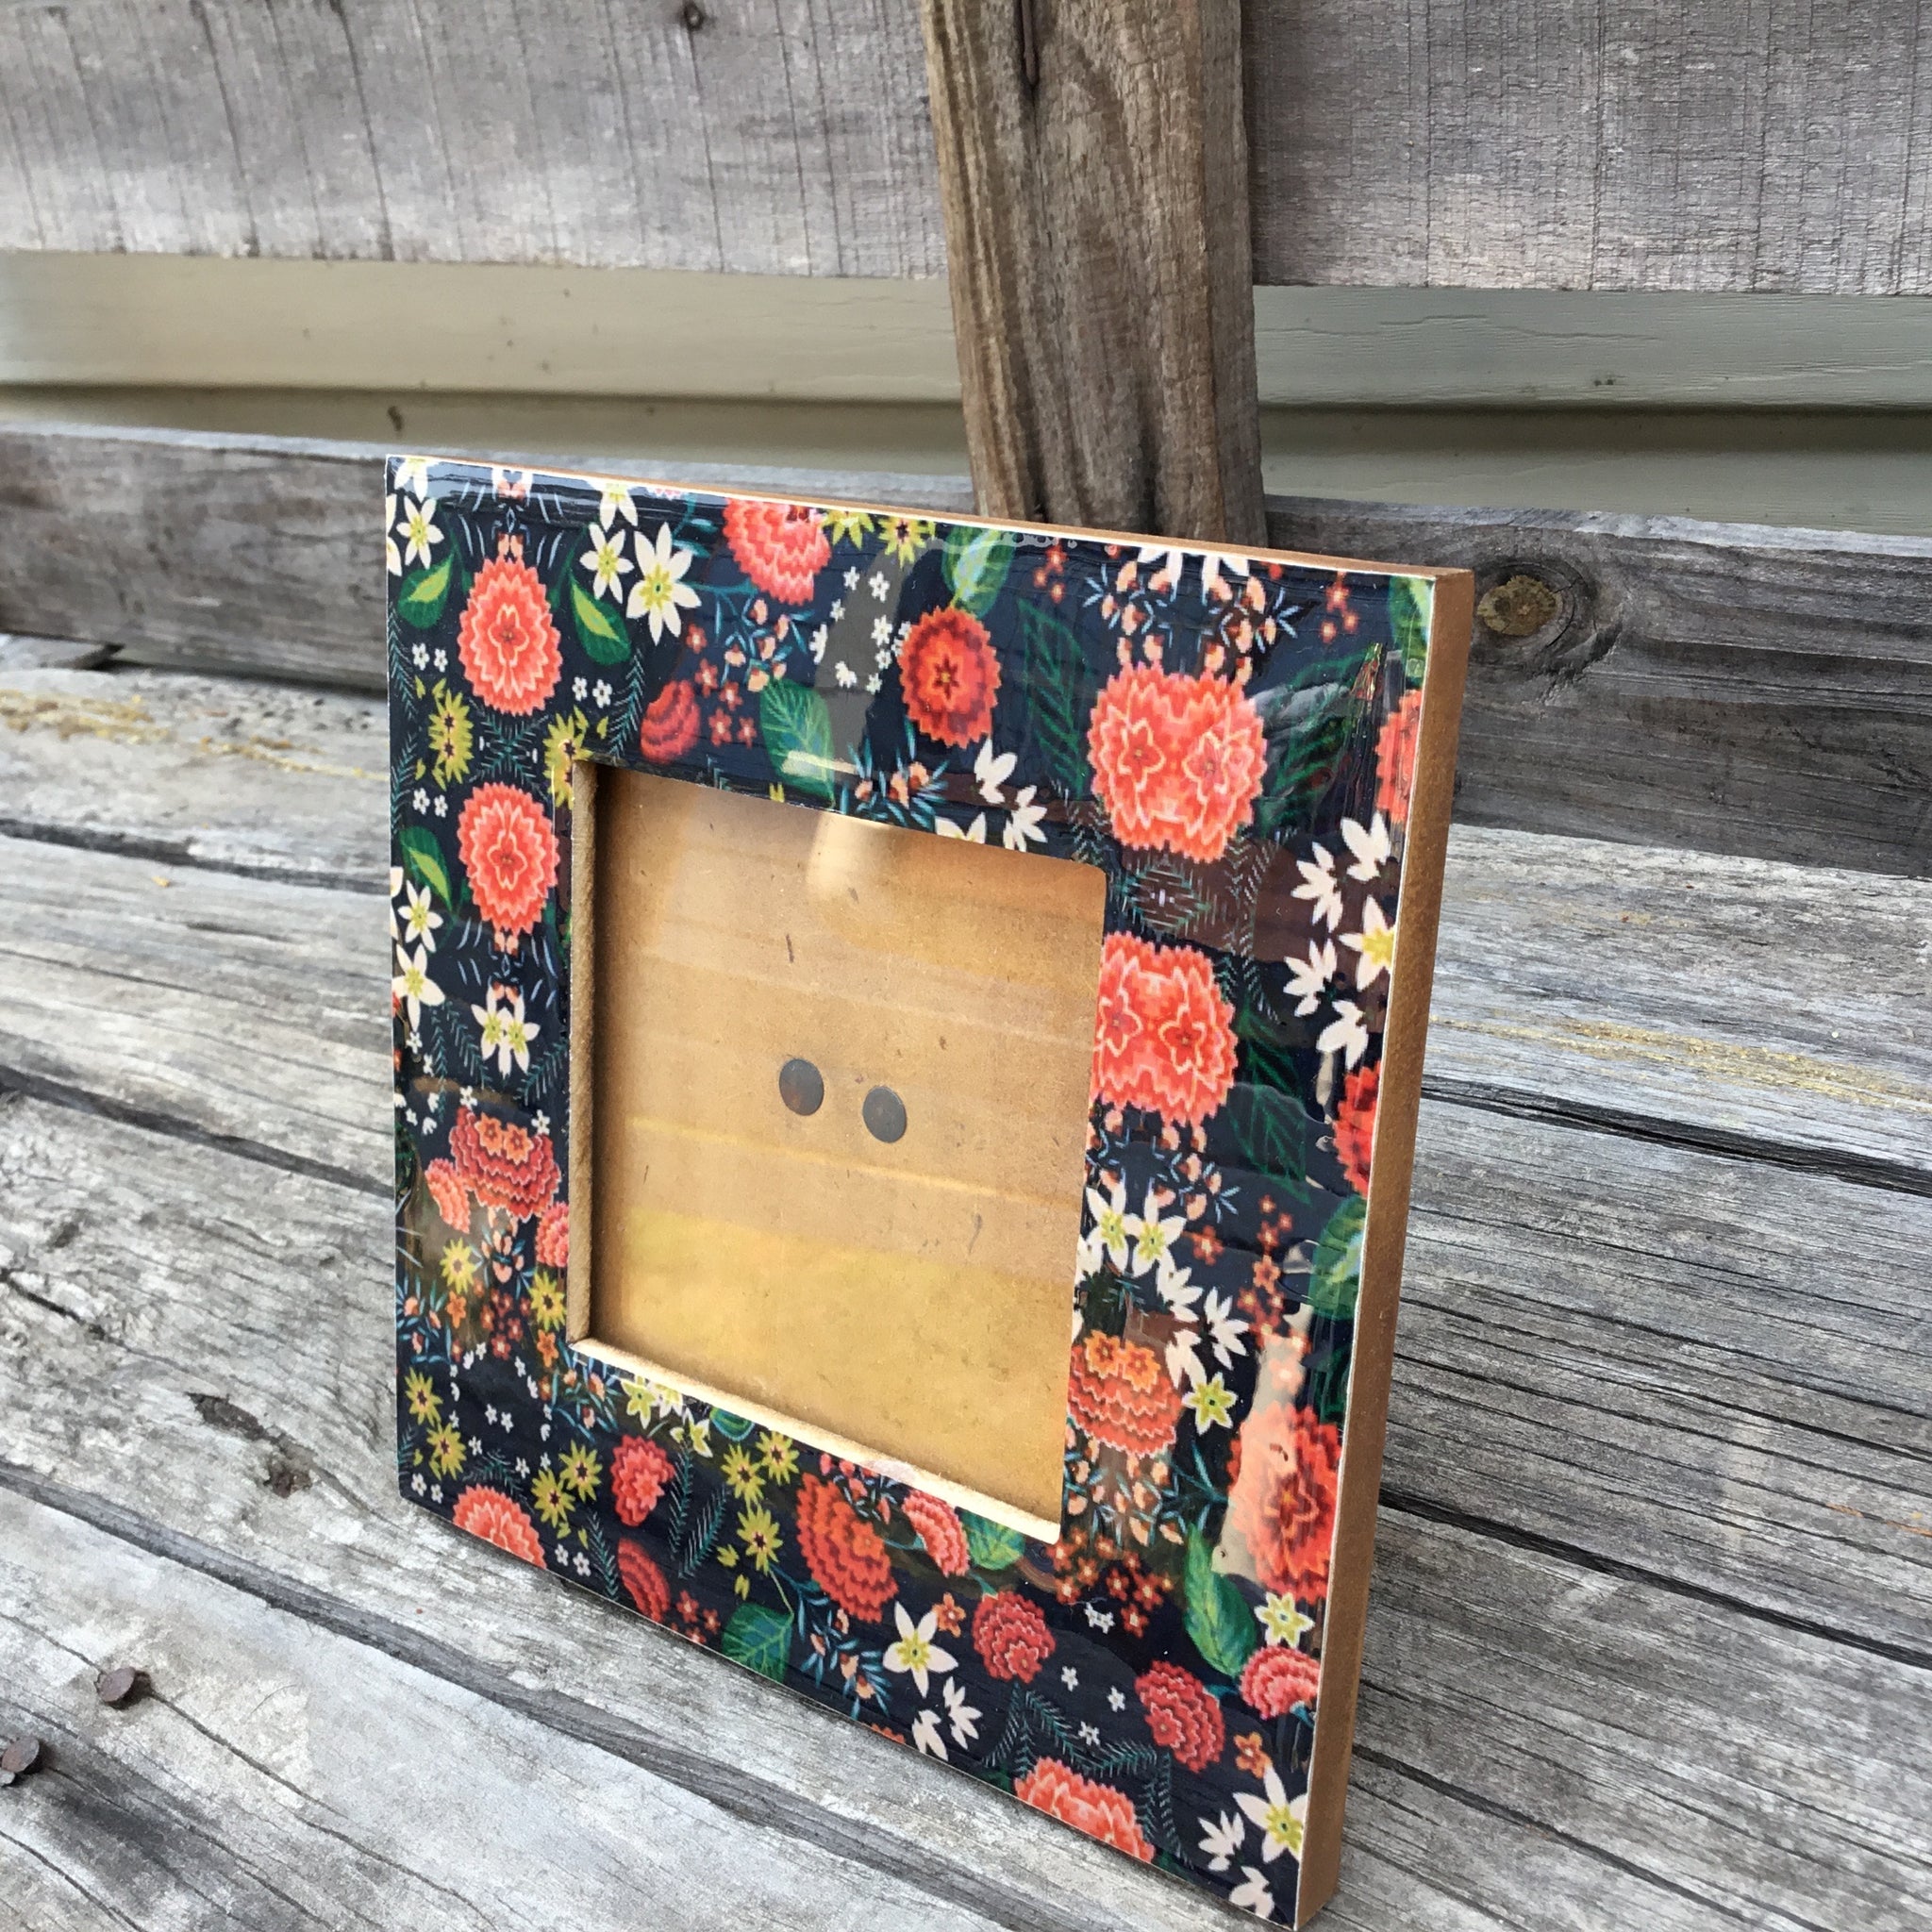 Fair Trade Ethical Resin and Wood Photo Frame Flower Design